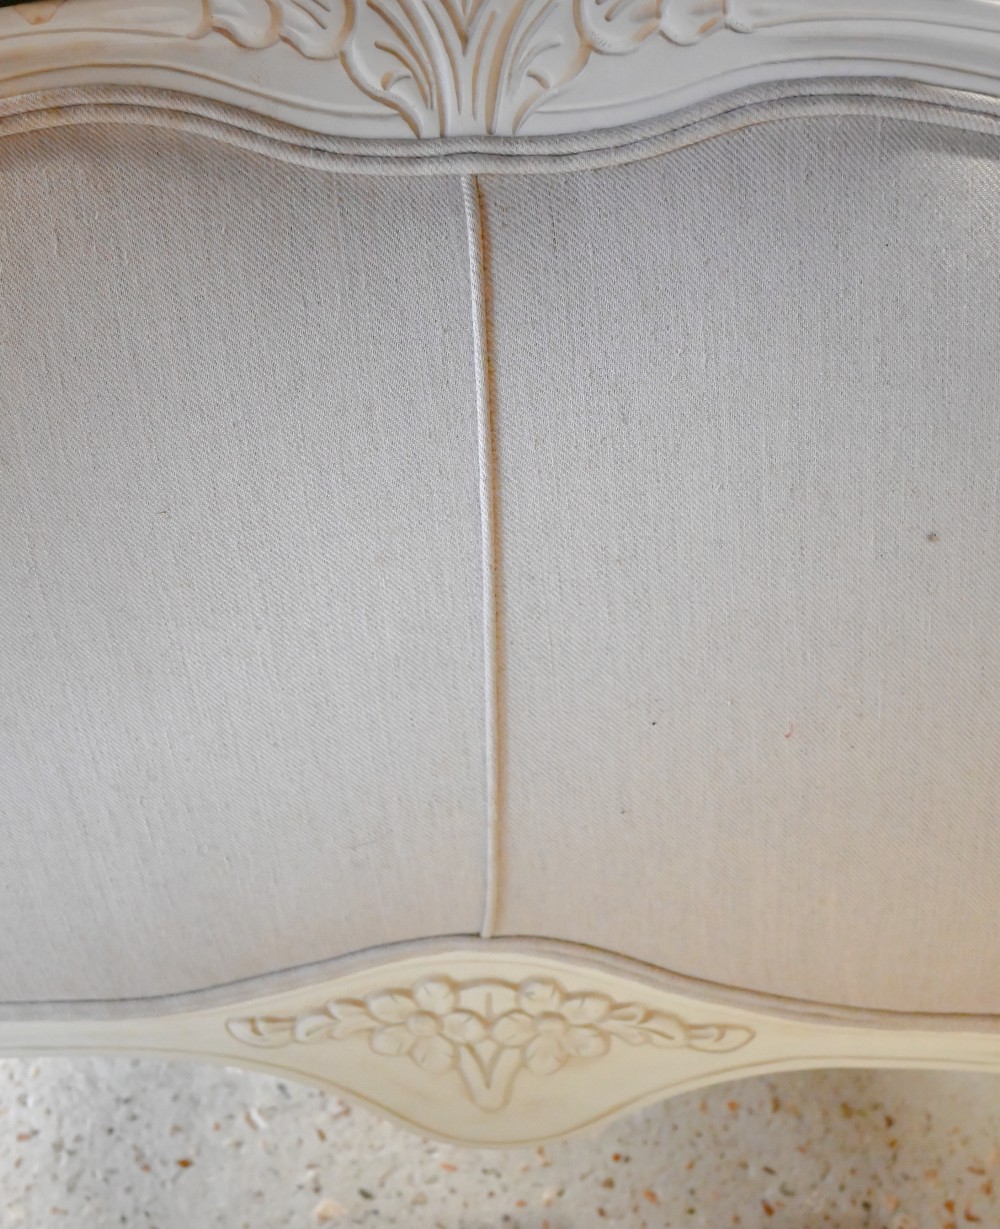 Laura Ashley 'Provencale' king-size bed frame (160 cm wide) grey linen upholstery - Image 3 of 3